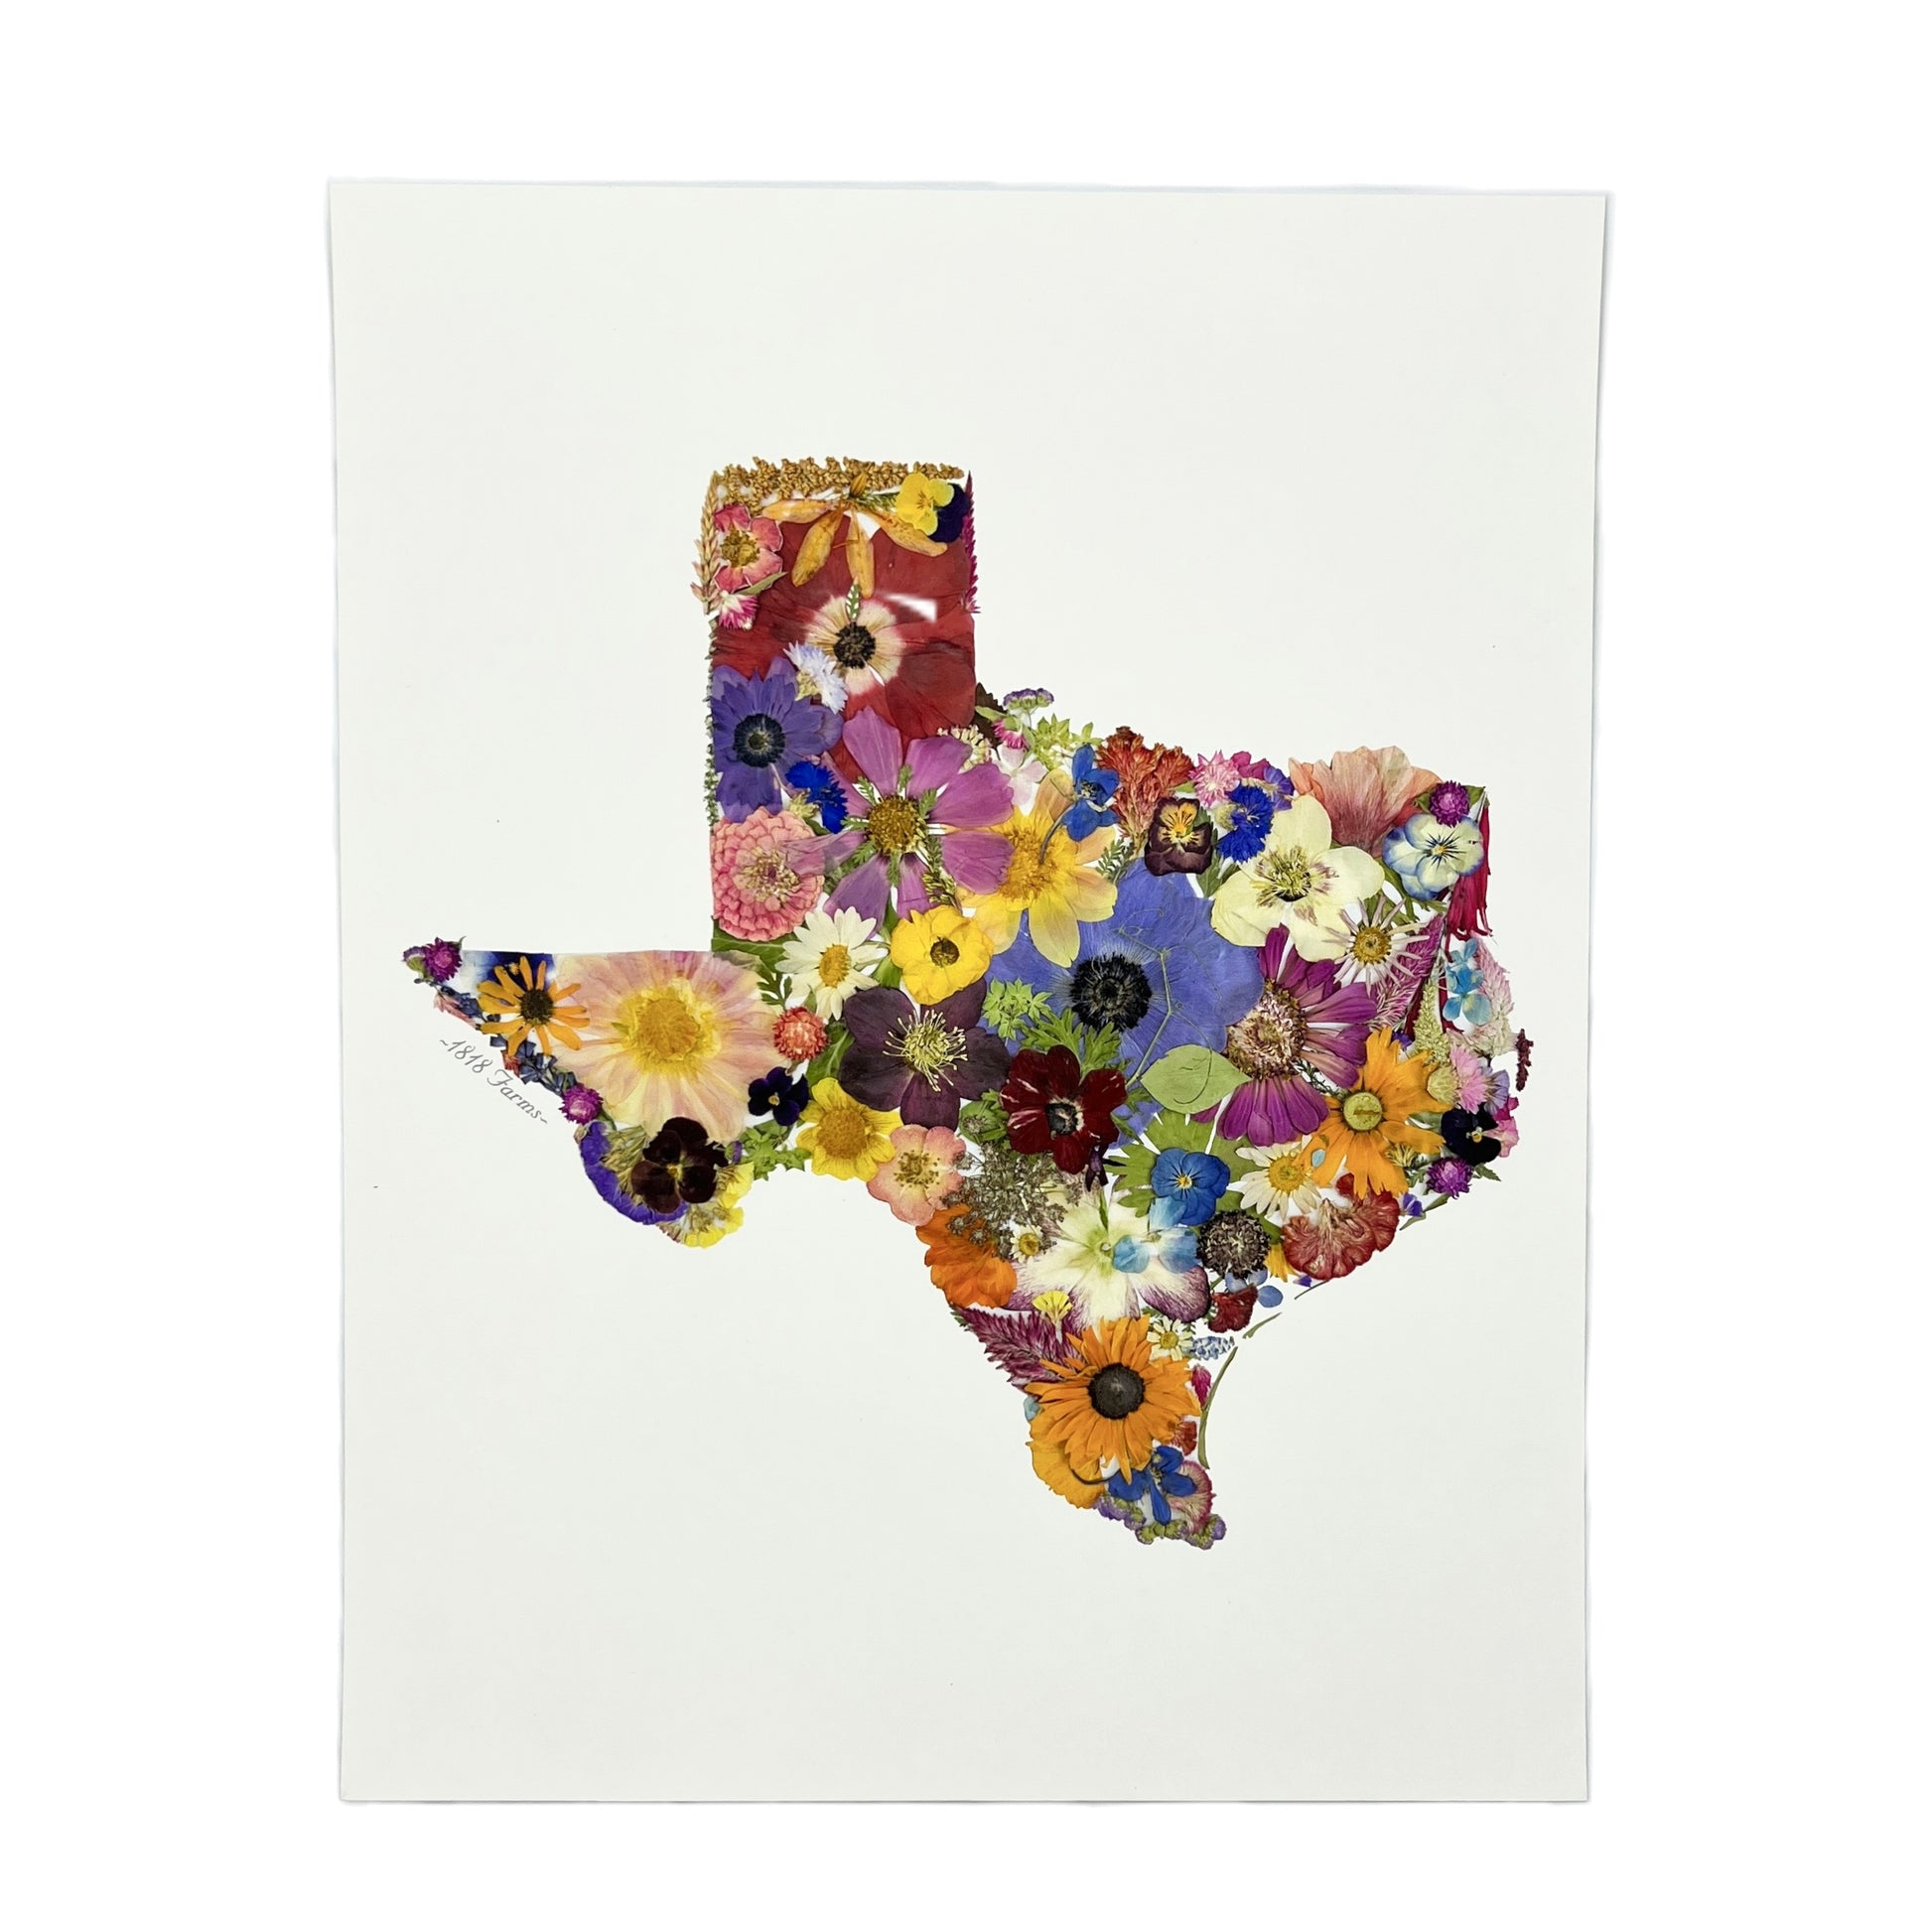 State Themed Giclée Print Featuring Dried, Pressed Flowers - "Where I Bloom" Collection Giclee Art Print 1818 Farms 11"x14" Texas 